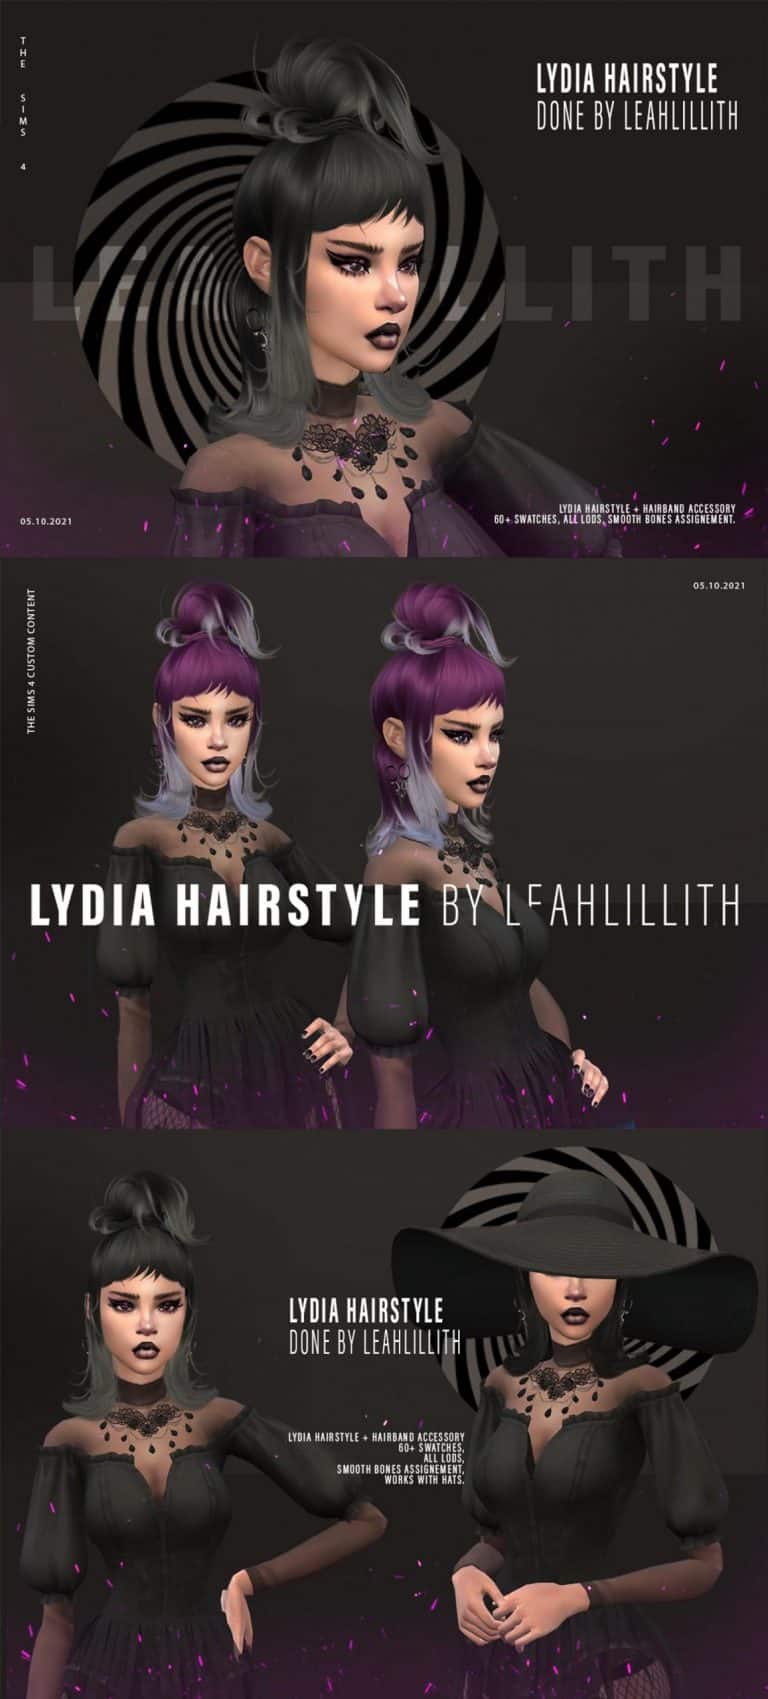 lydia hairstyle leahlillith scaled